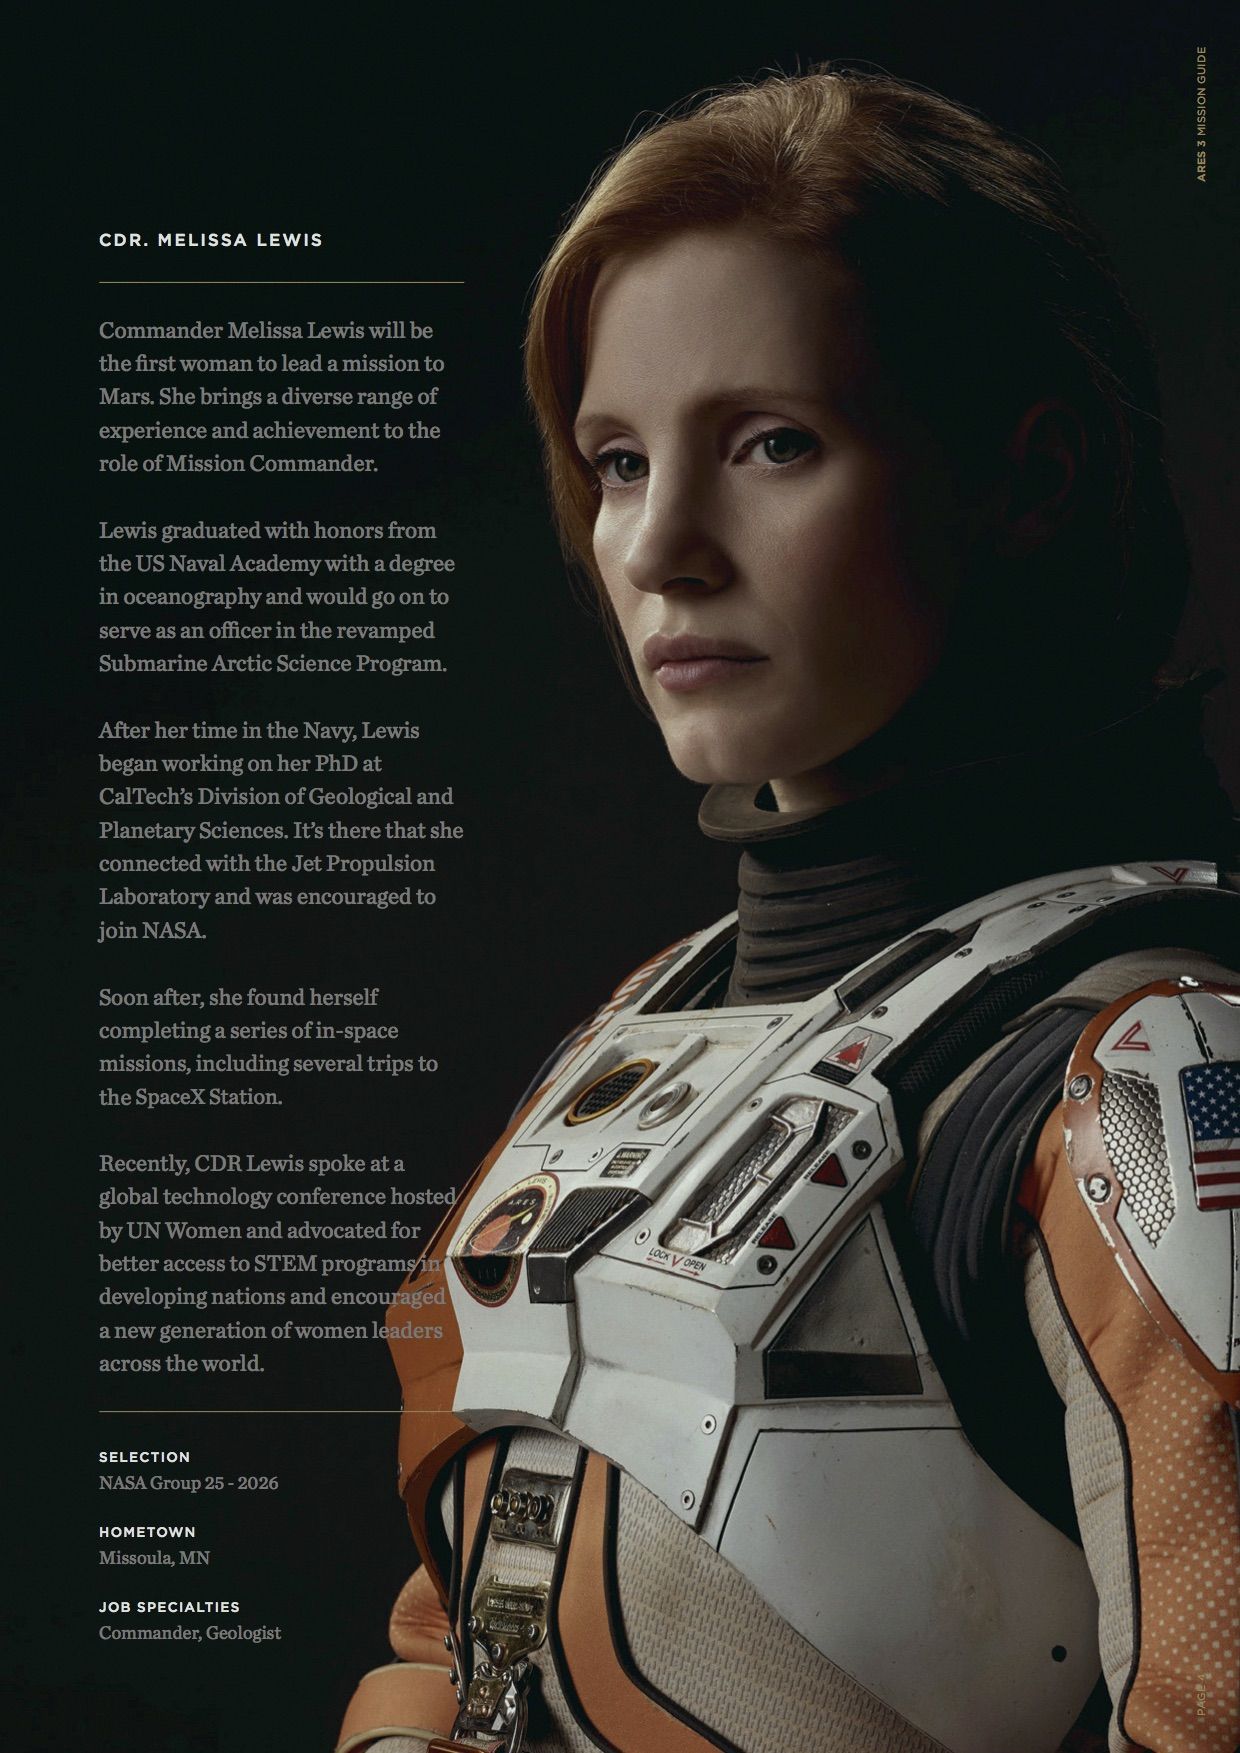 The Martian Mission Guide Biography Melissa Lewis